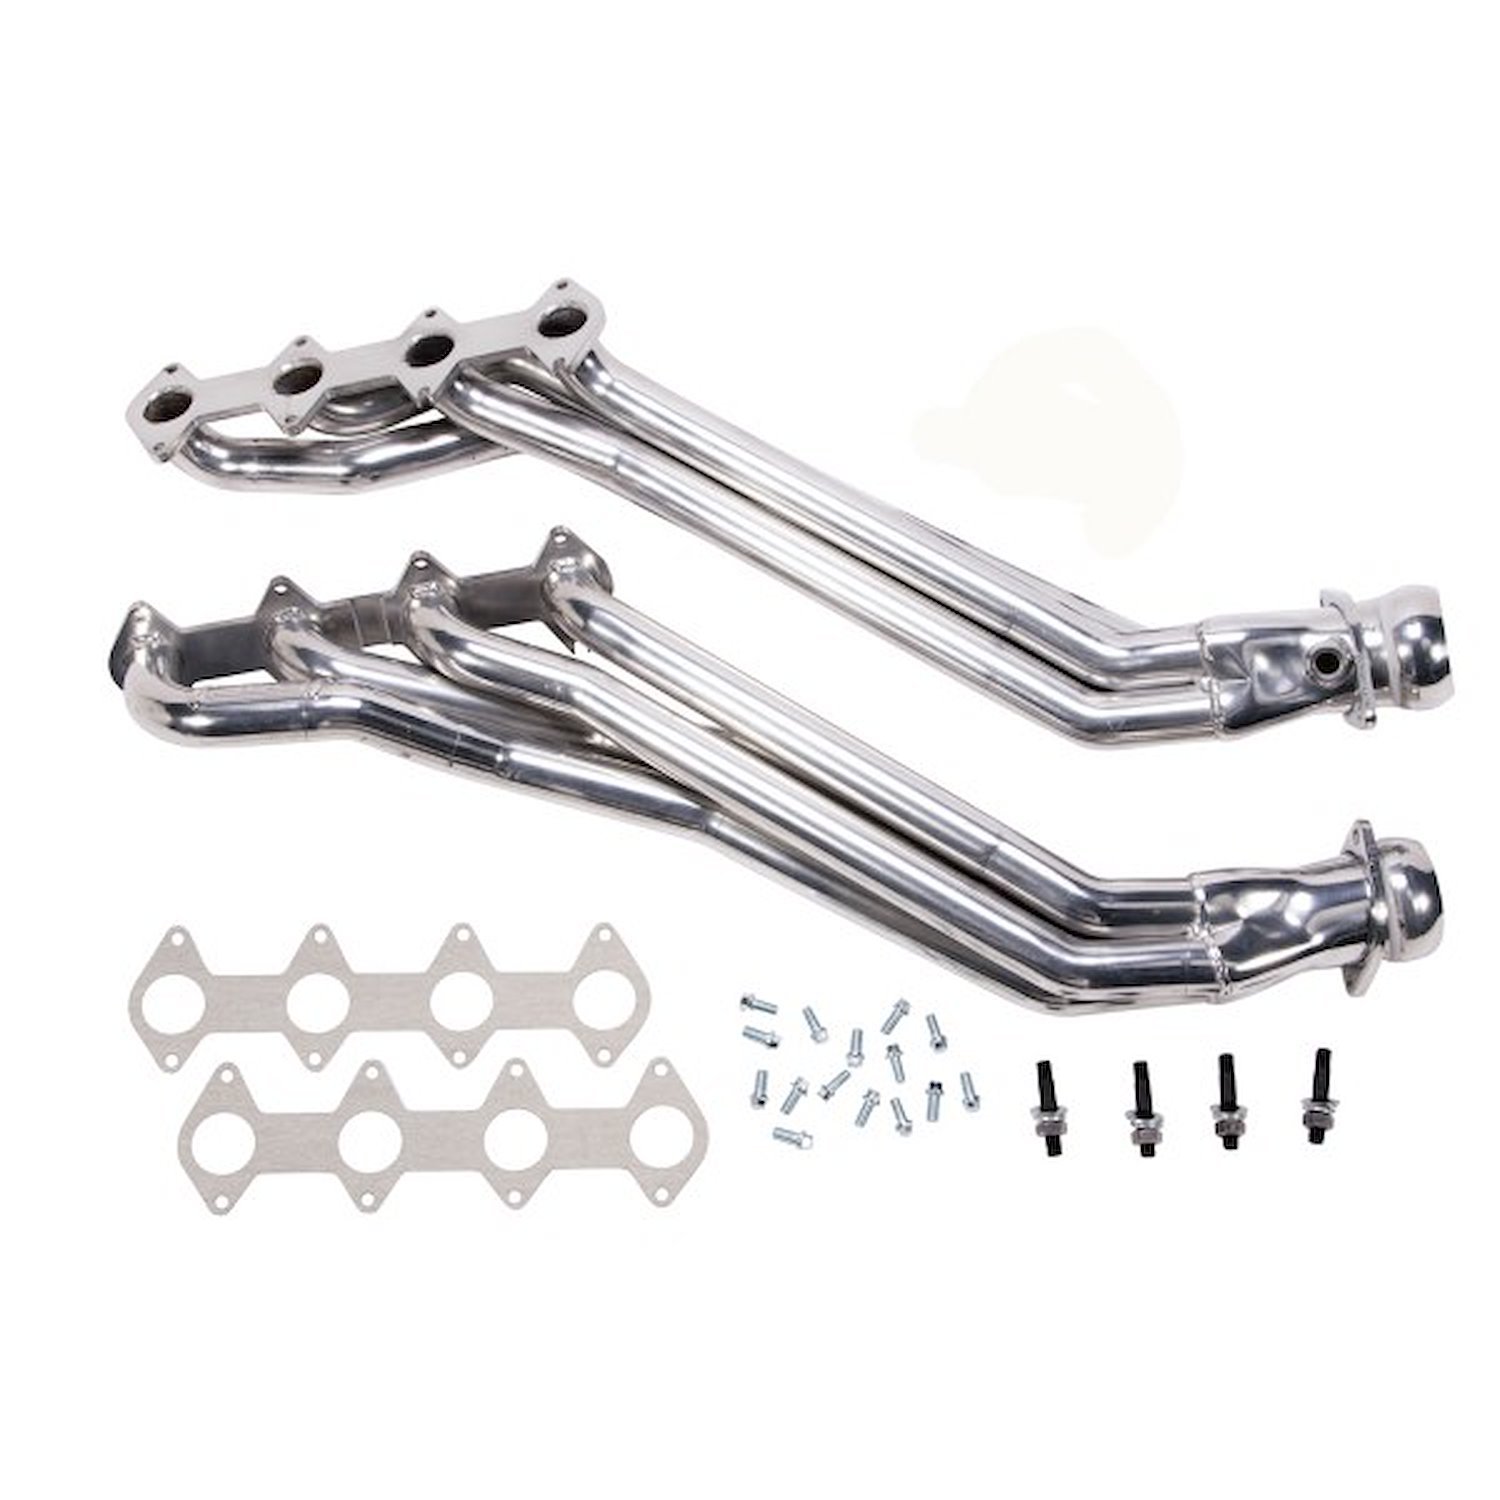 Long-Tube Headers 2005-2010 Ford Mustang GT 4.6L with